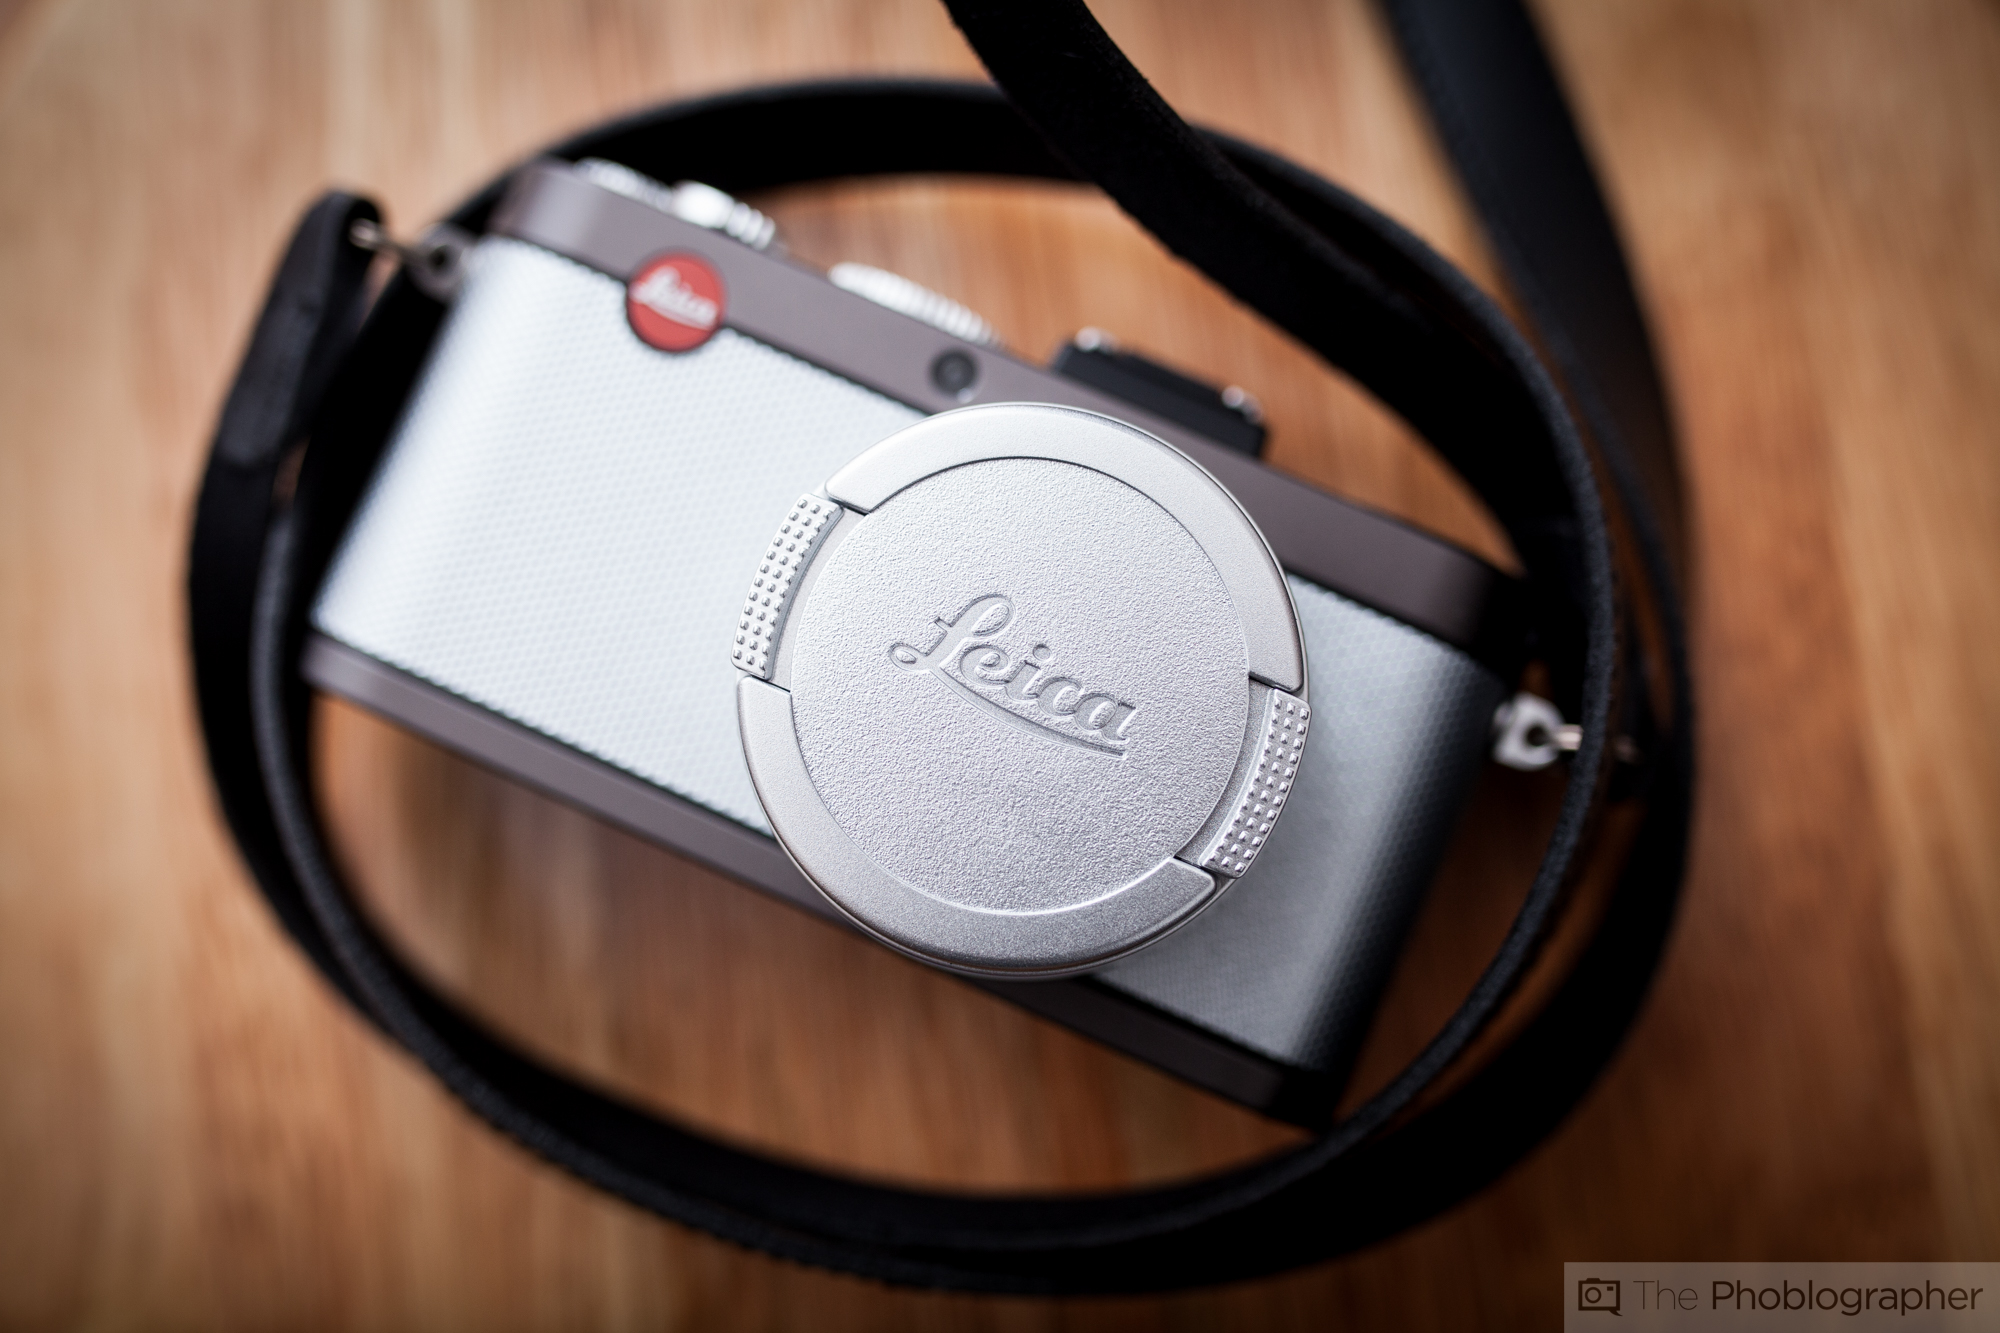 The Leica Digital Cameras That Will Become Classics